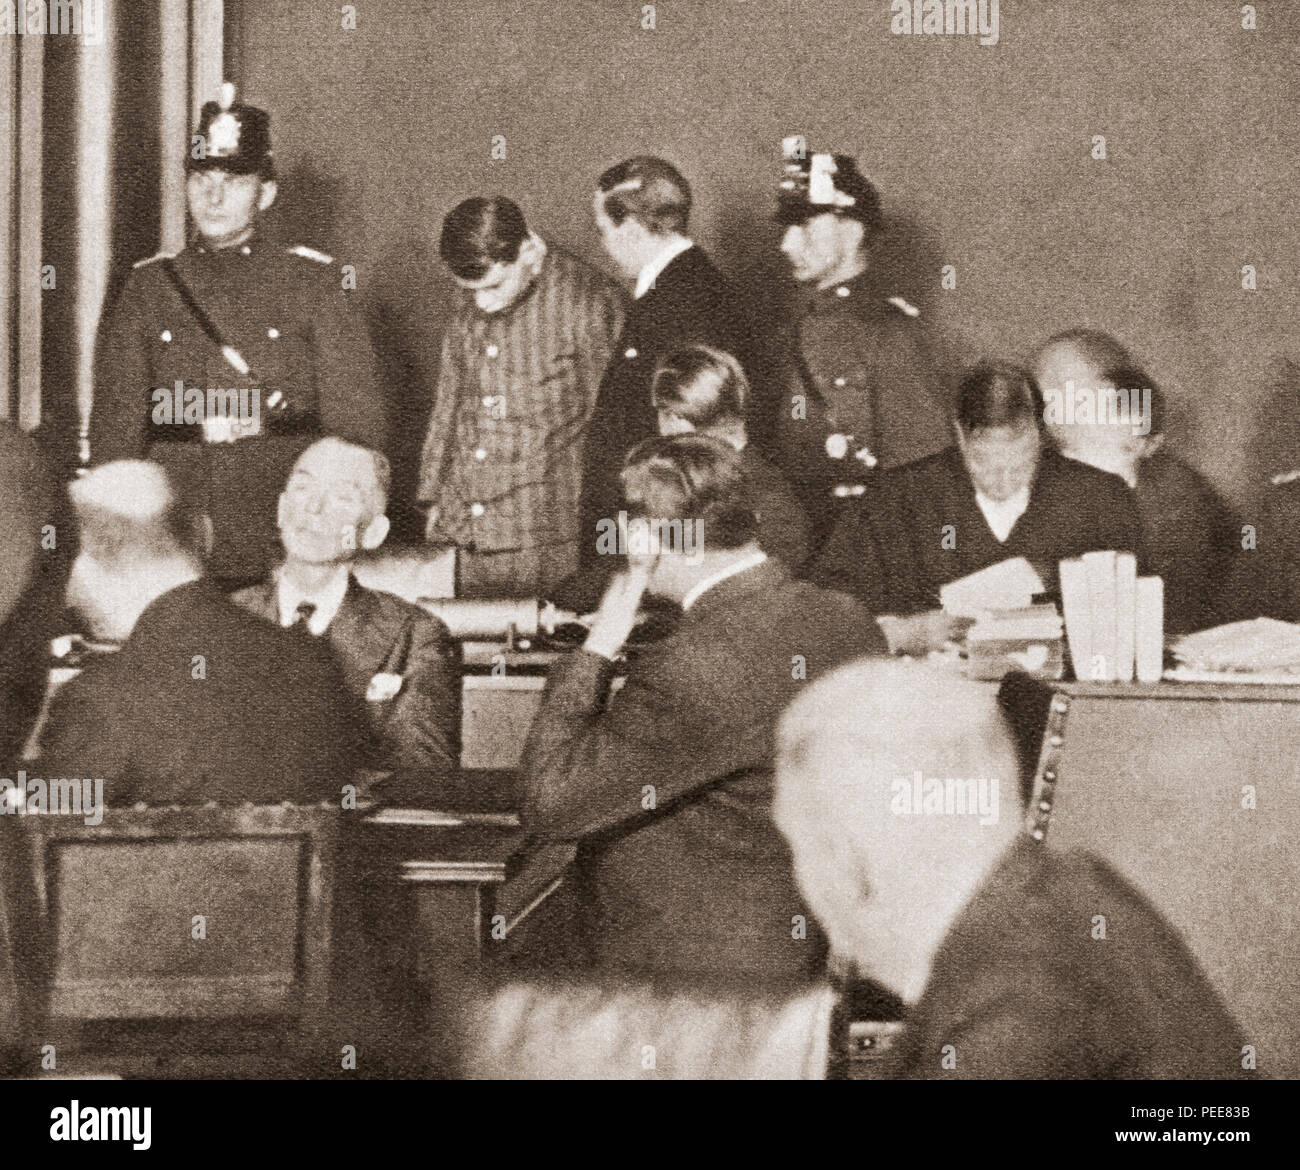 Marinus (Rinus) van der Lubbe, 1909 – 1934.  Dutch council communist tried, convicted and executed for setting fire to the German Reichstag building on 27 February 1933.  He is seen here in court, wearing a convict uniform and with his head bowed.  From These Tremendous Years, published 1938. Stock Photo